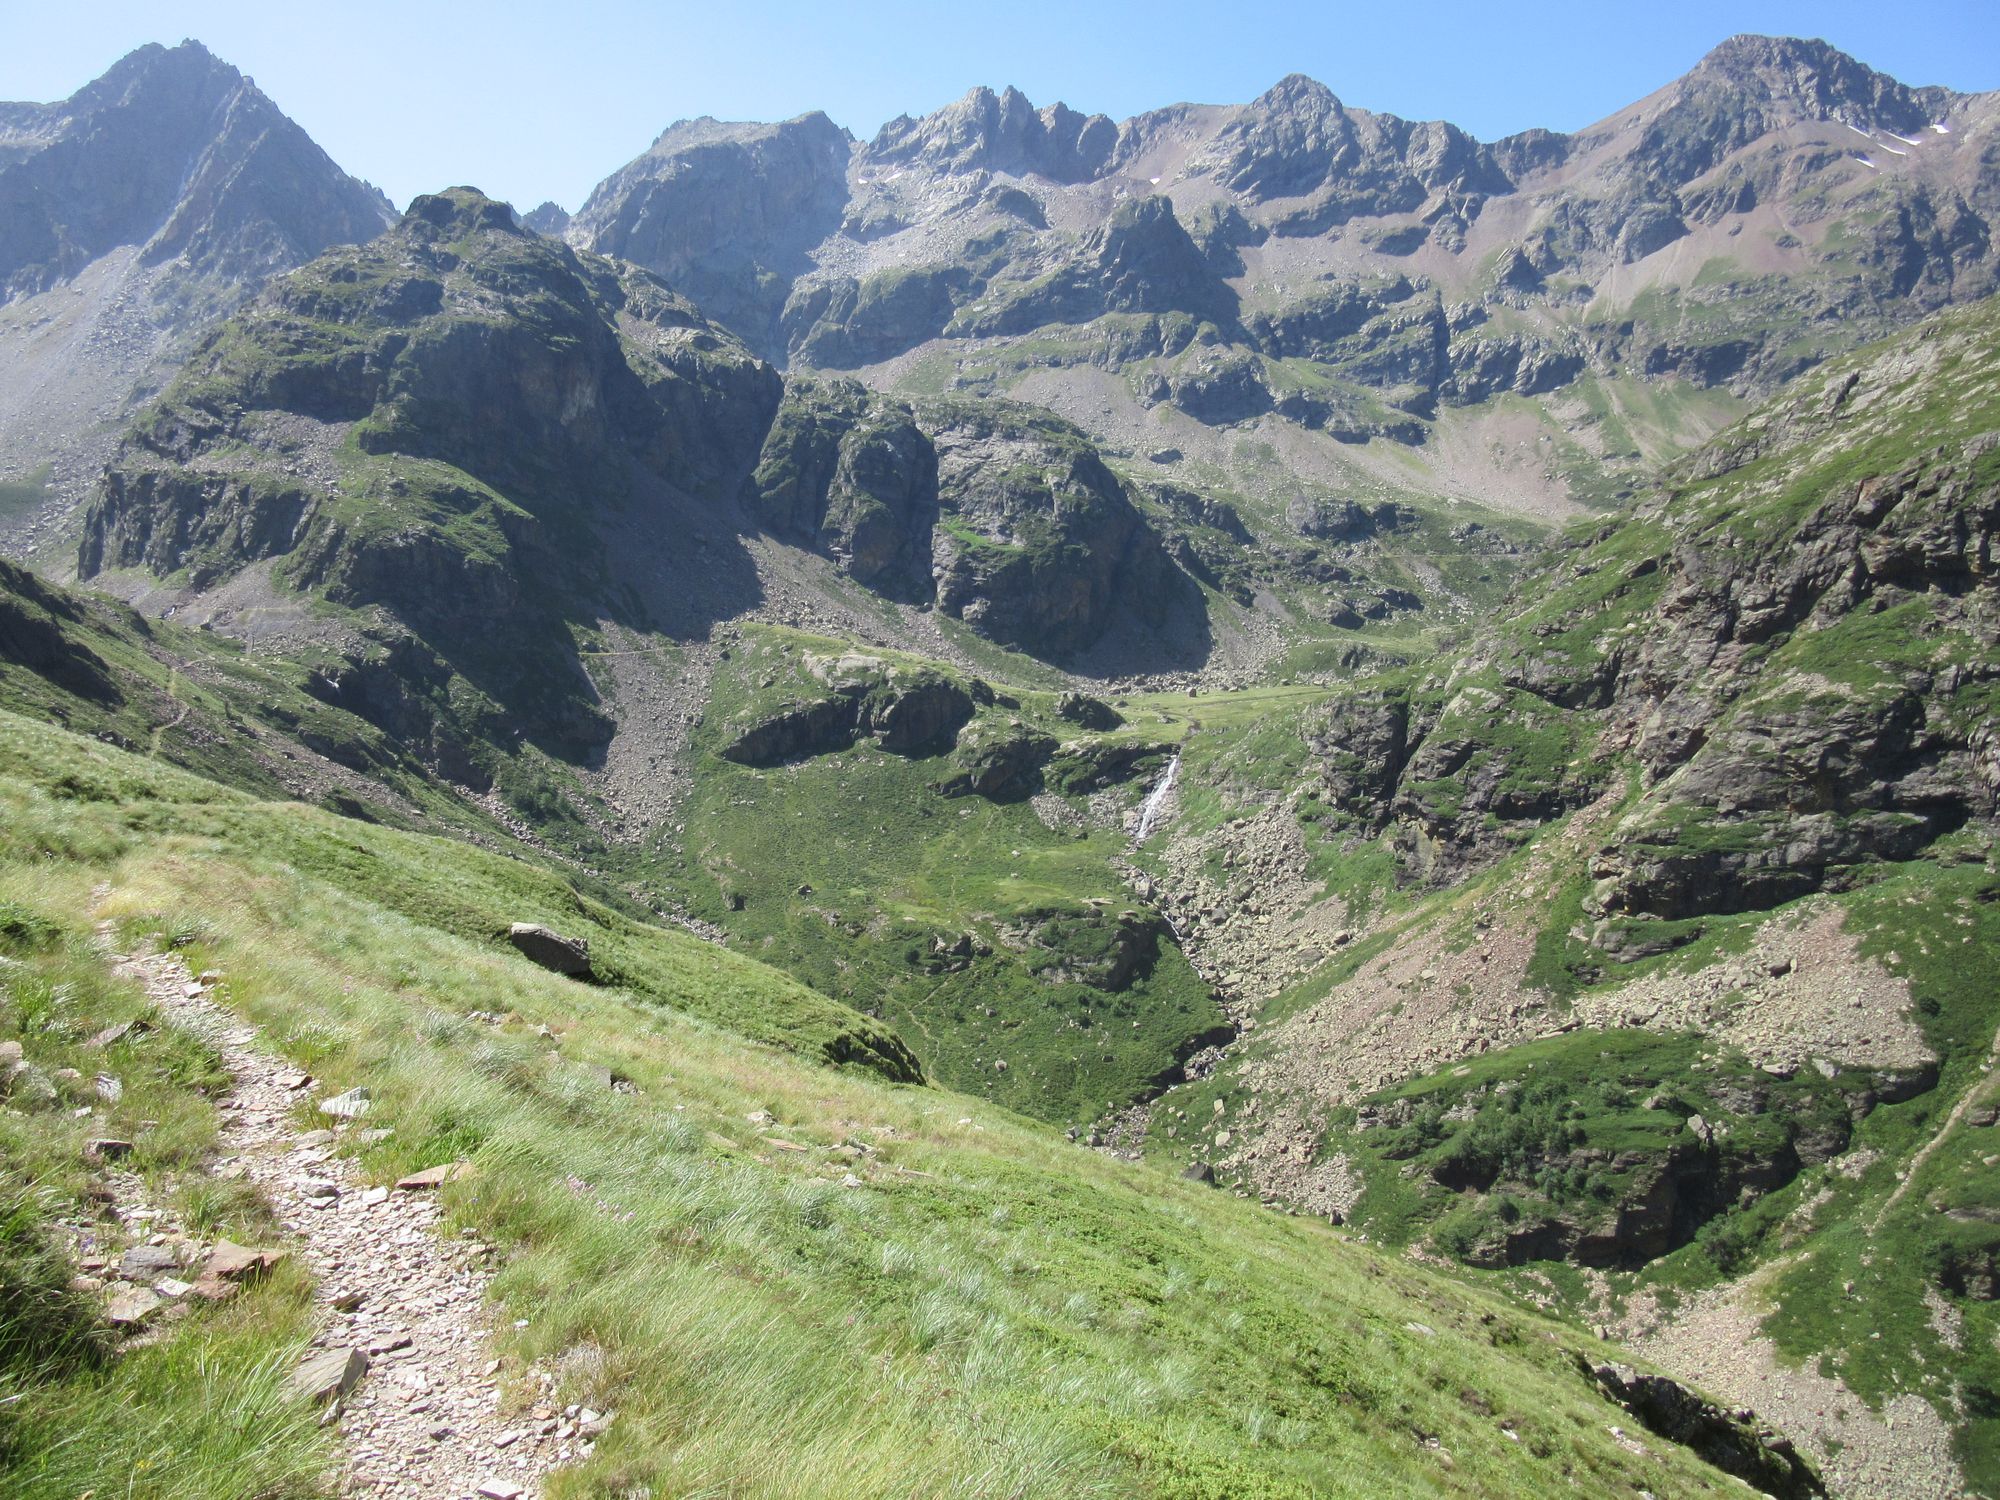 Headed towards the head of the valley and the Cabane de Prat-Cazeneuve Ou Aygues Tortes.